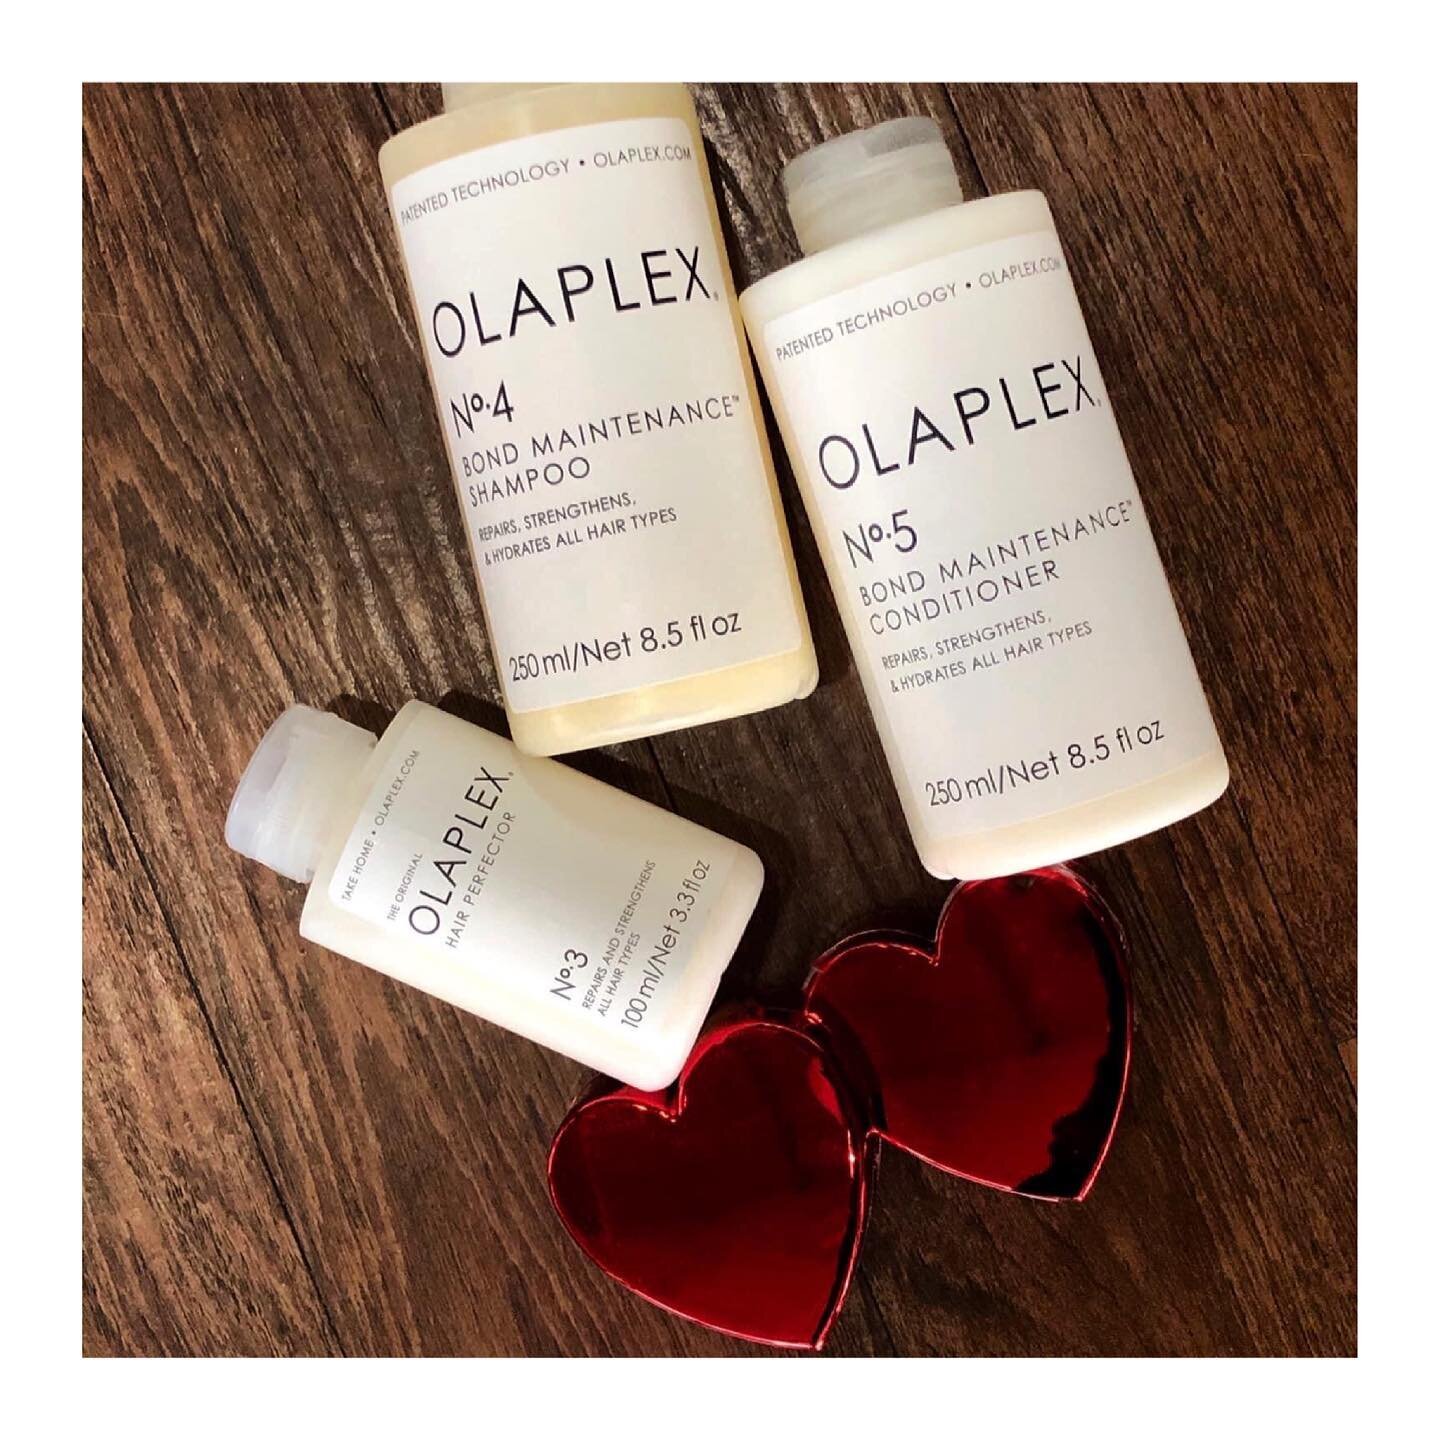 Happy Valentine&rsquo;s Day ❤️ Show someone you love them with the gift of good, healthy hair 🙌🏻🥰 #beinspiredLB #olaplexlove #loveisinthehair